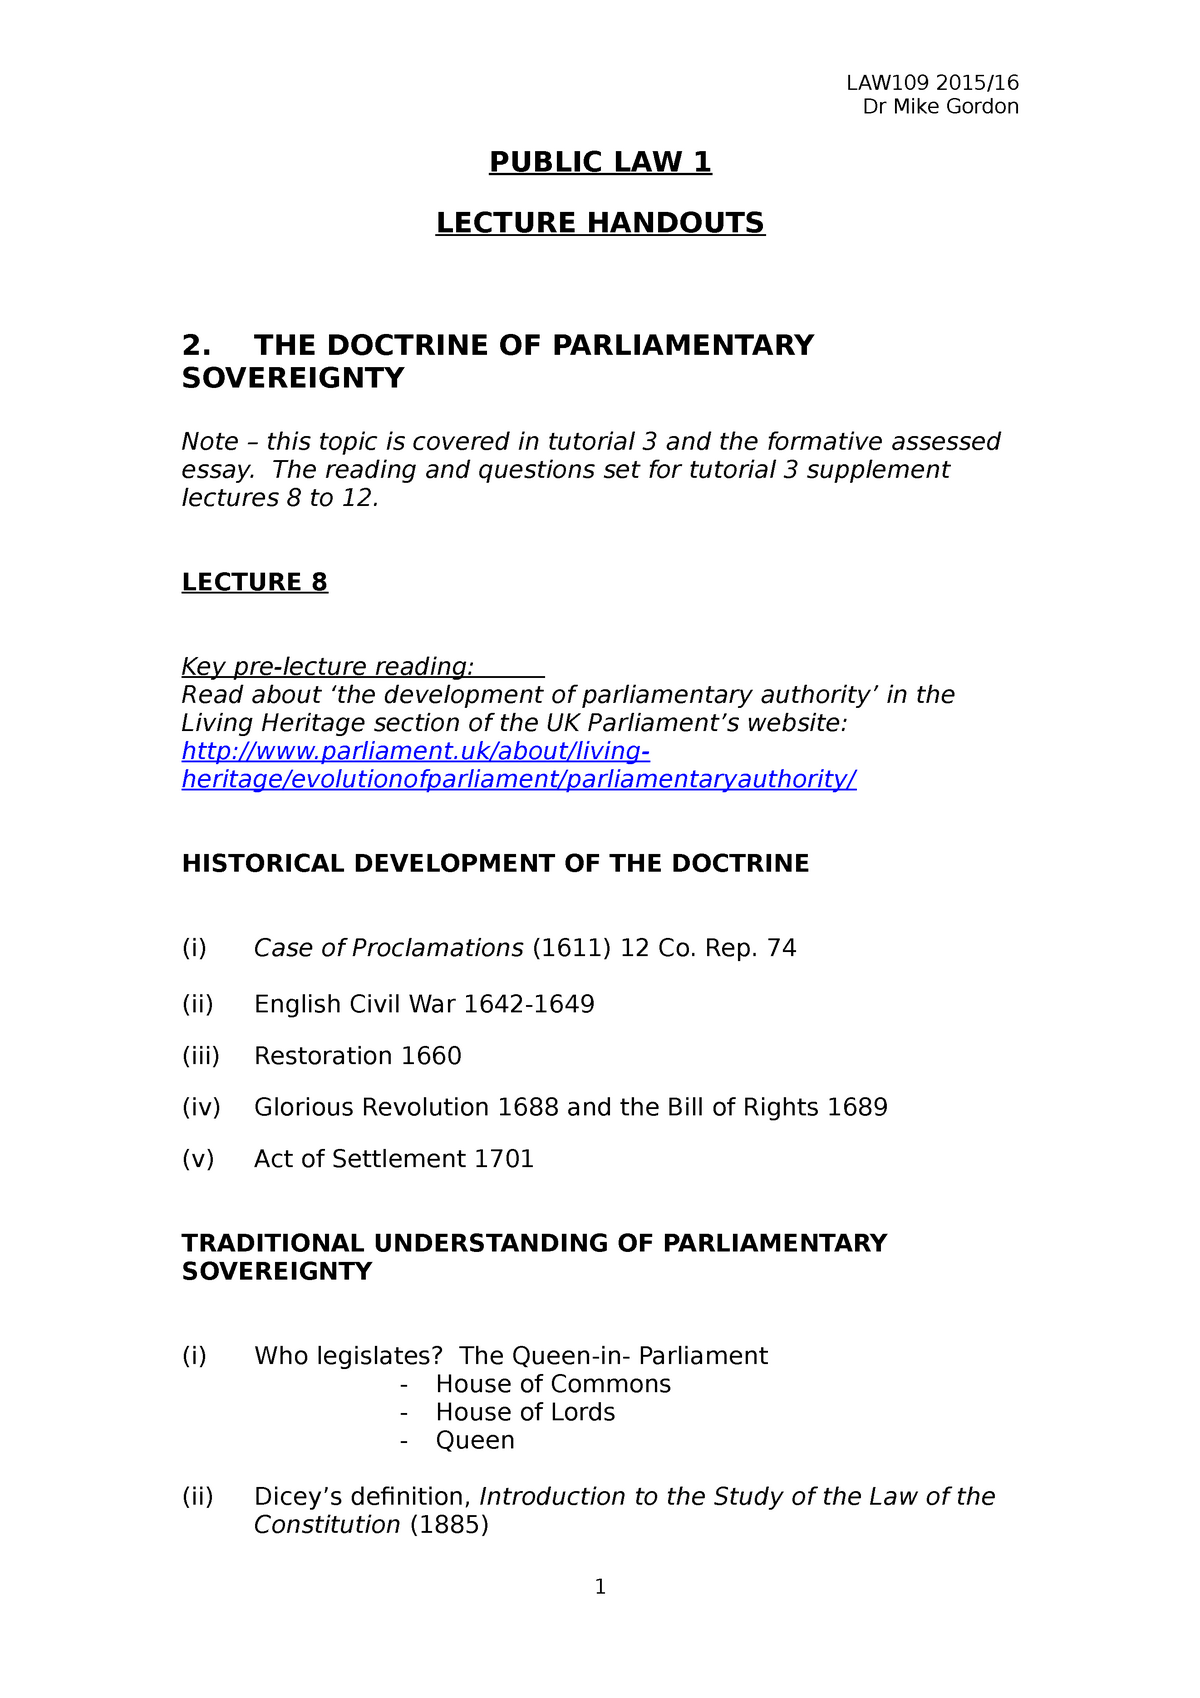 essay questions on parliamentary sovereignty